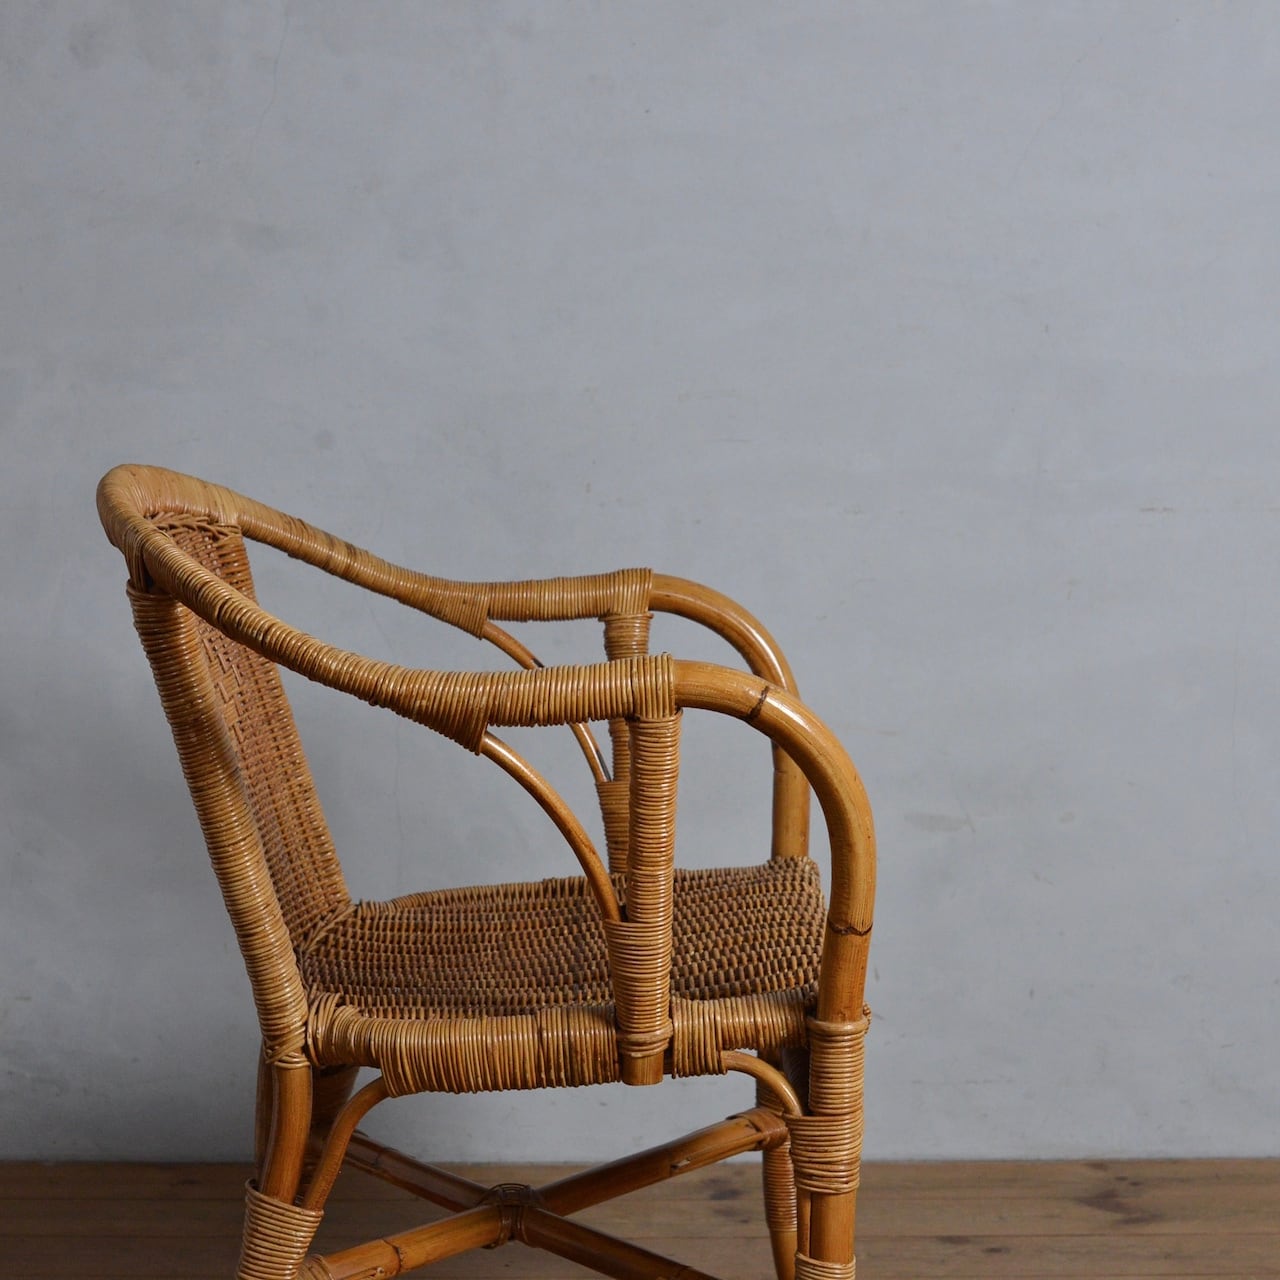 Rattan Chair / ラタン チェア A〈椅子・籐張り・店舗什器〉